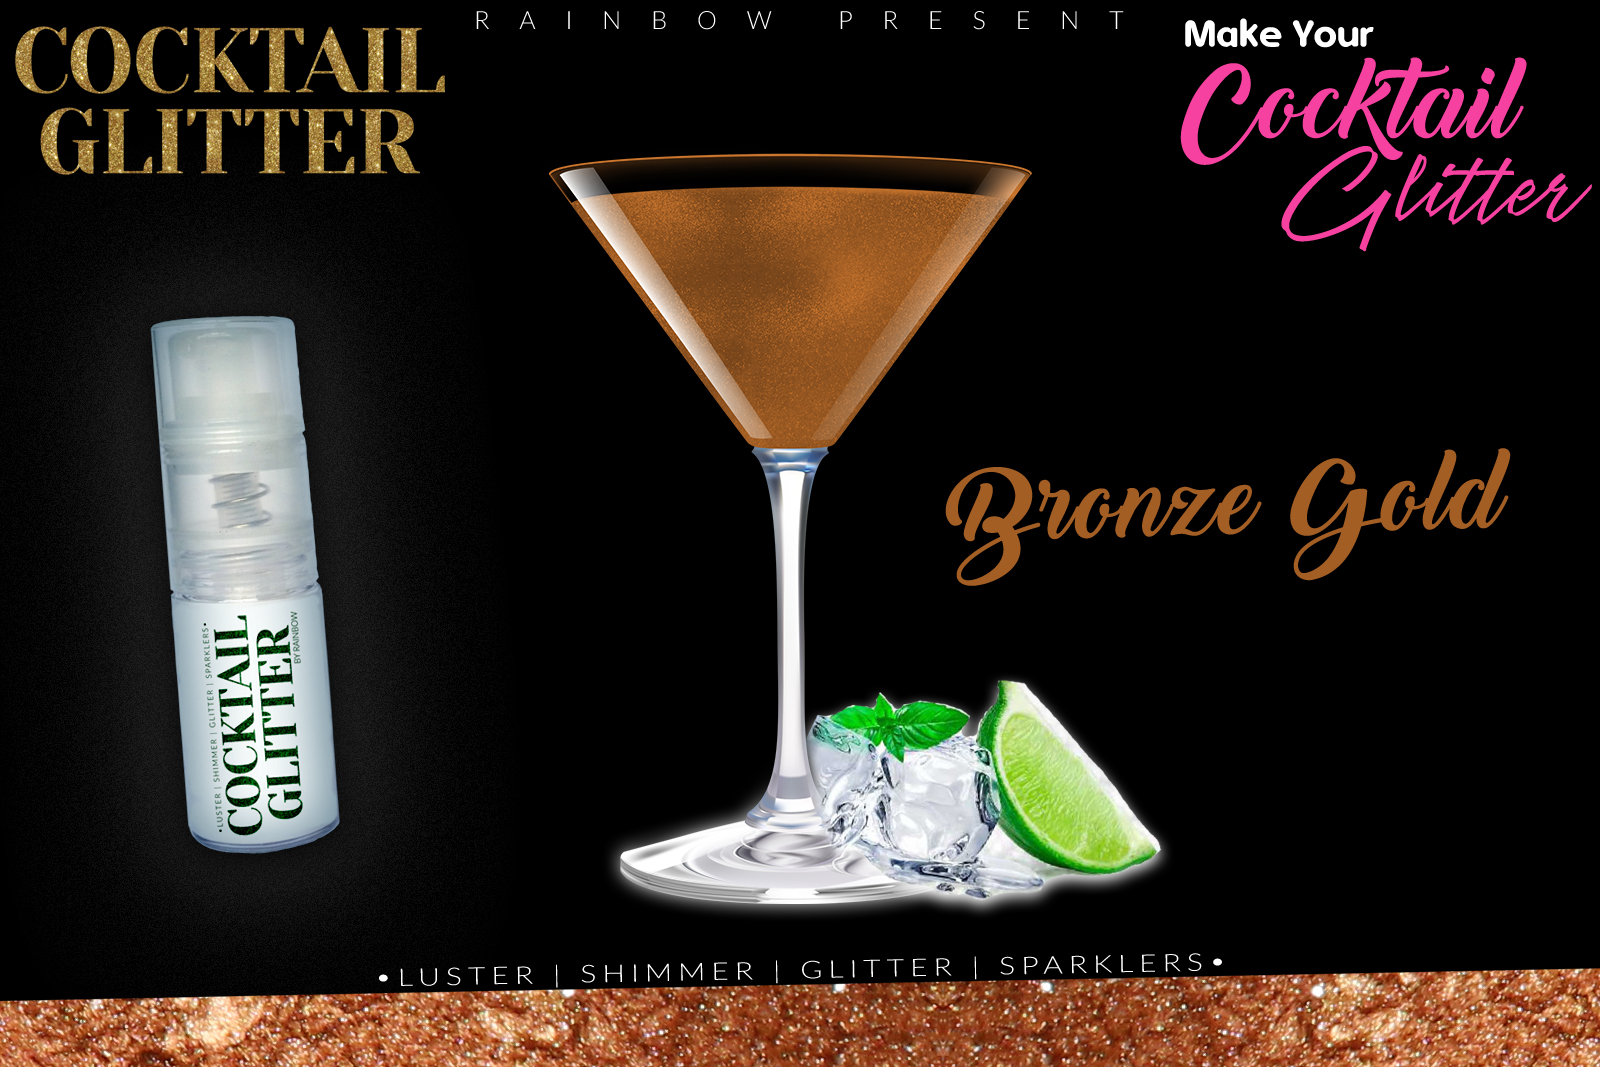 Glitzy Cocktail Glitter and Sparkling Effect | Edible | Bronze